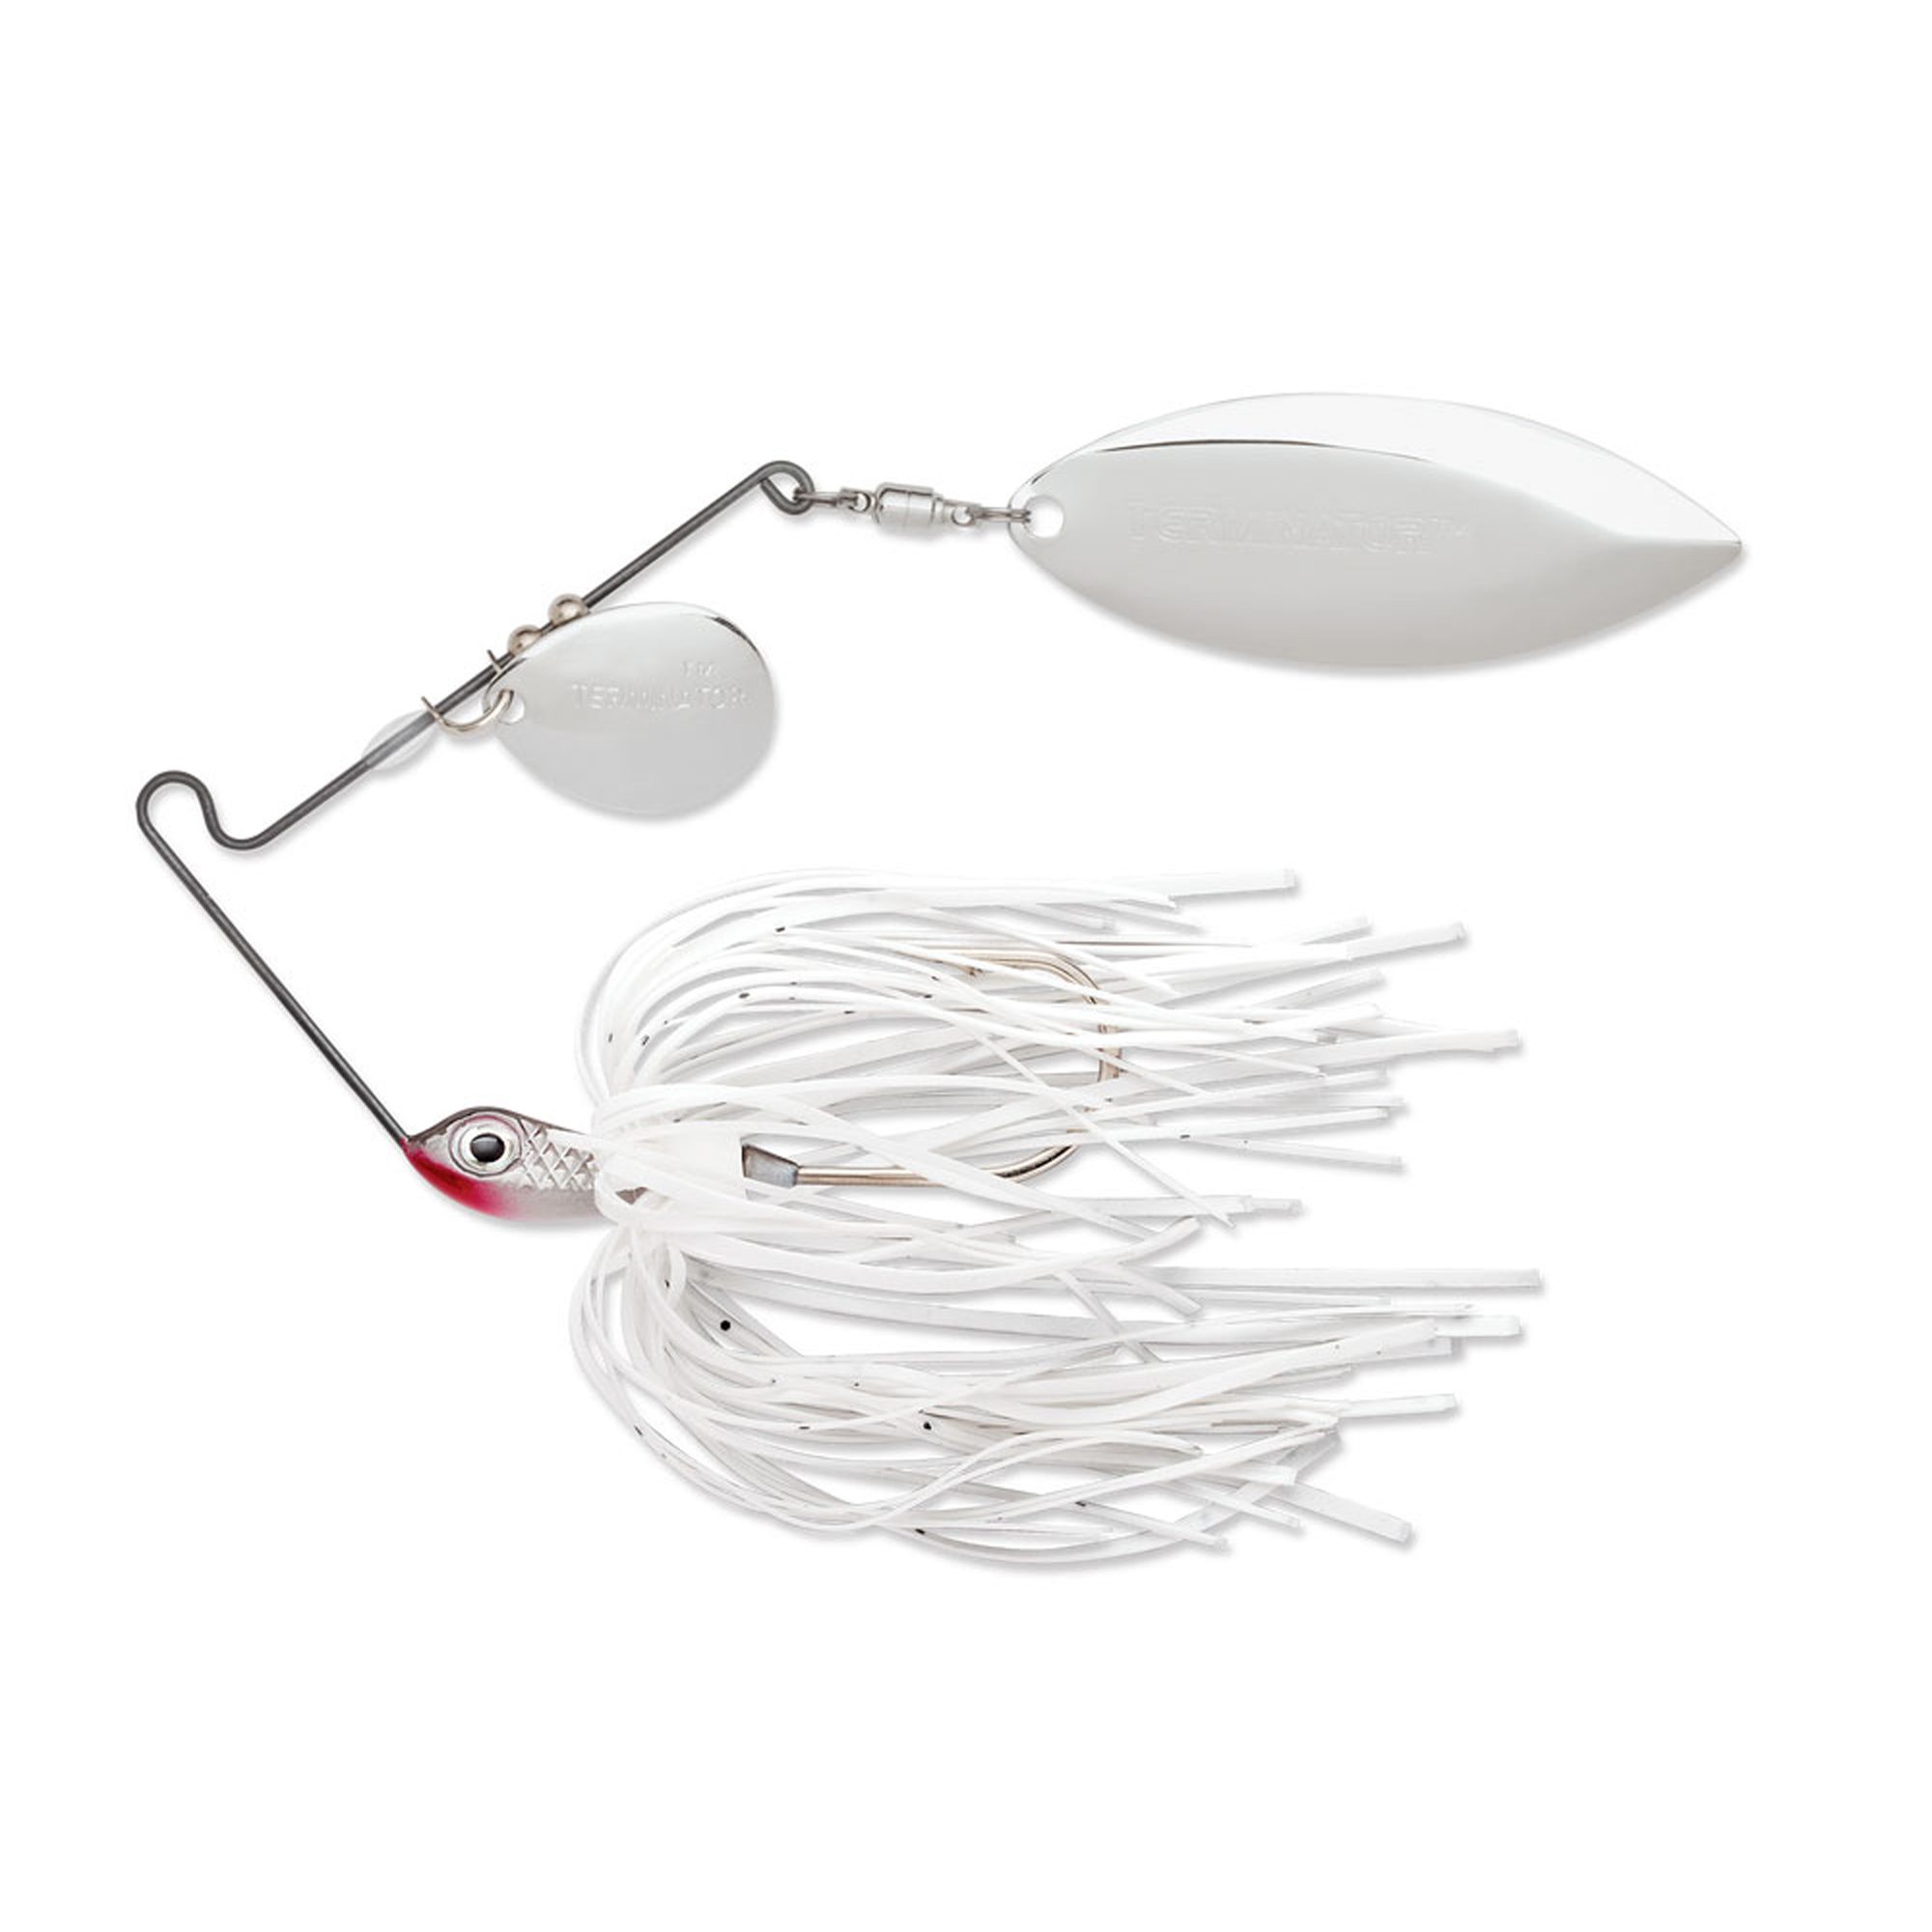 Terminator - Super Stainless Spinnerbait - Tackle Depot